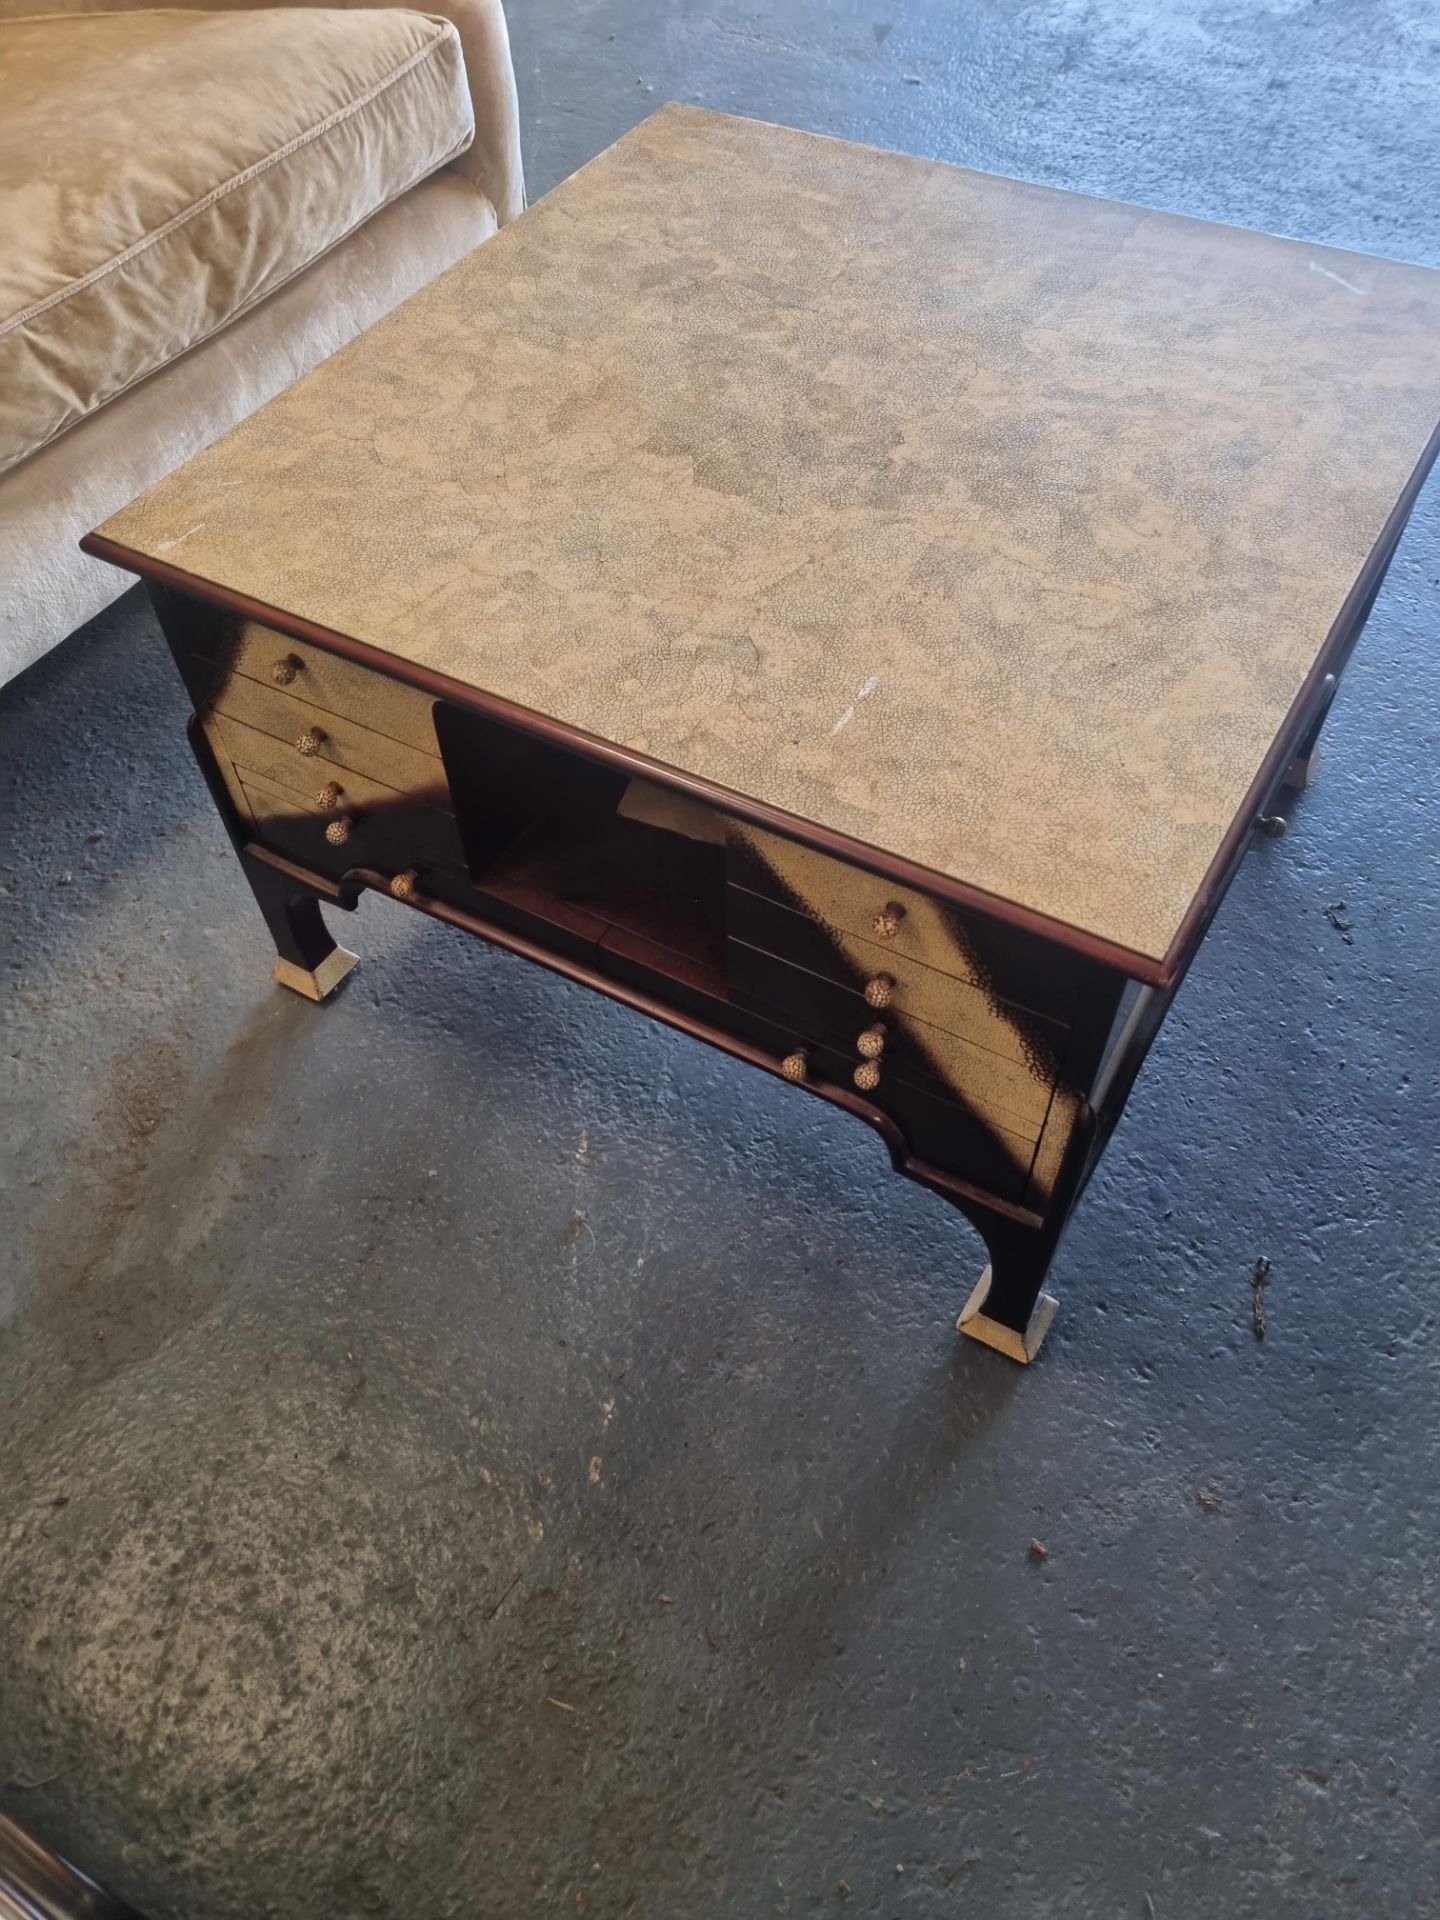 Eggshell Topped Mahogany Coffee Table With Drawers And Slide Outs Cm Width Cm Depth Cm - Image 2 of 4